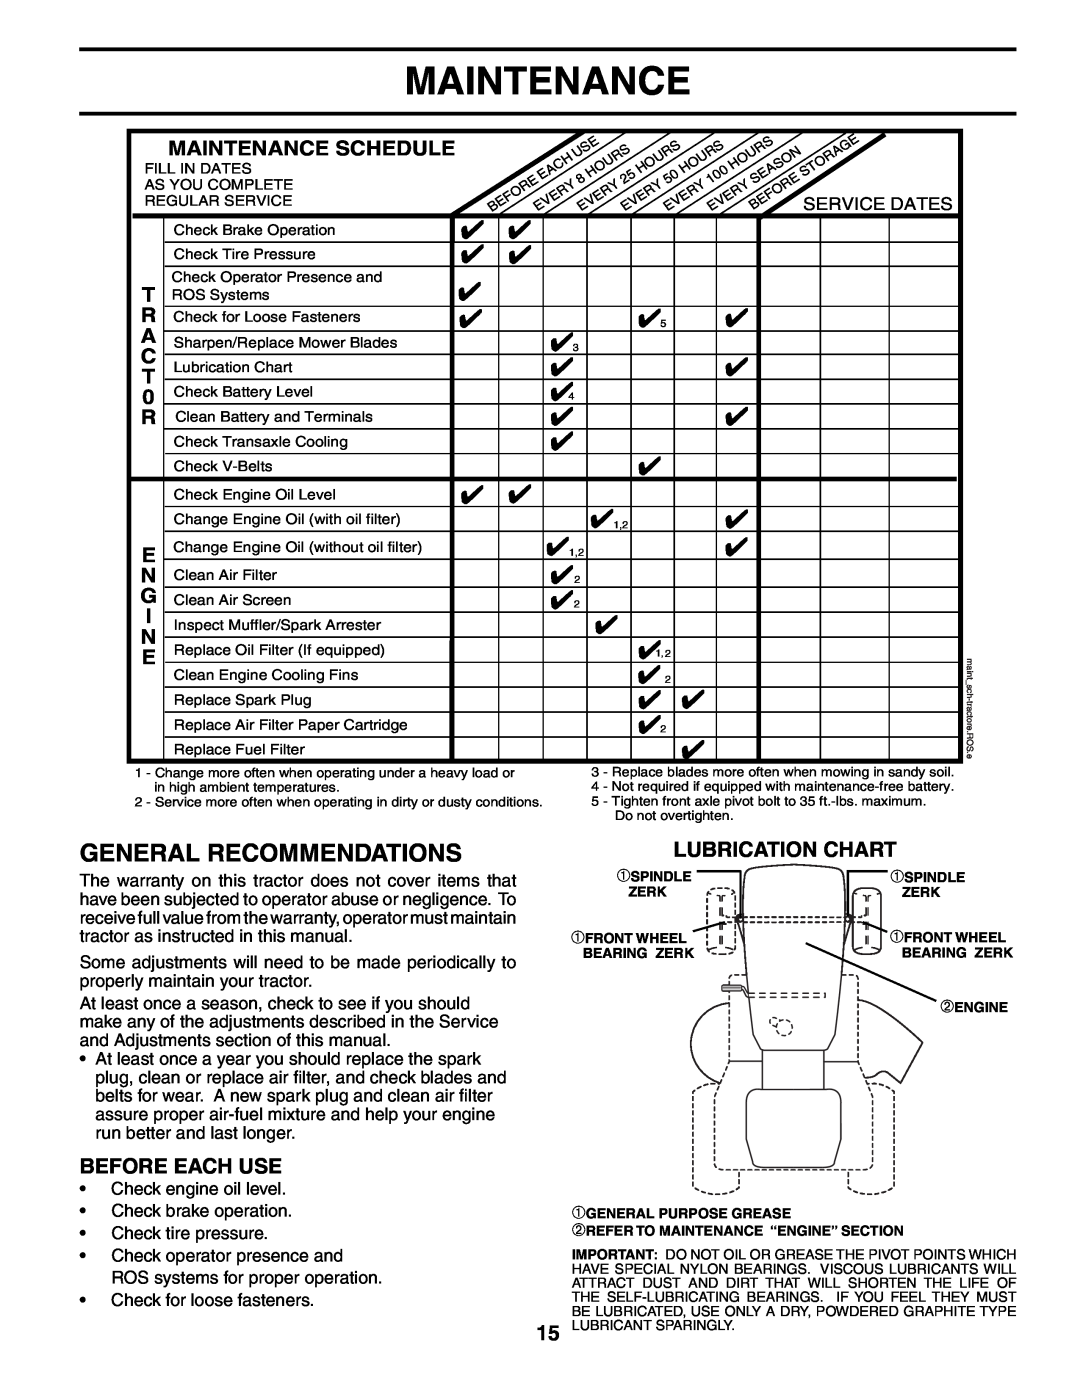 Ryobi 197788 manual General Recommendations, Lubrication Chart, Before Each Use, Maintenance Schedule 